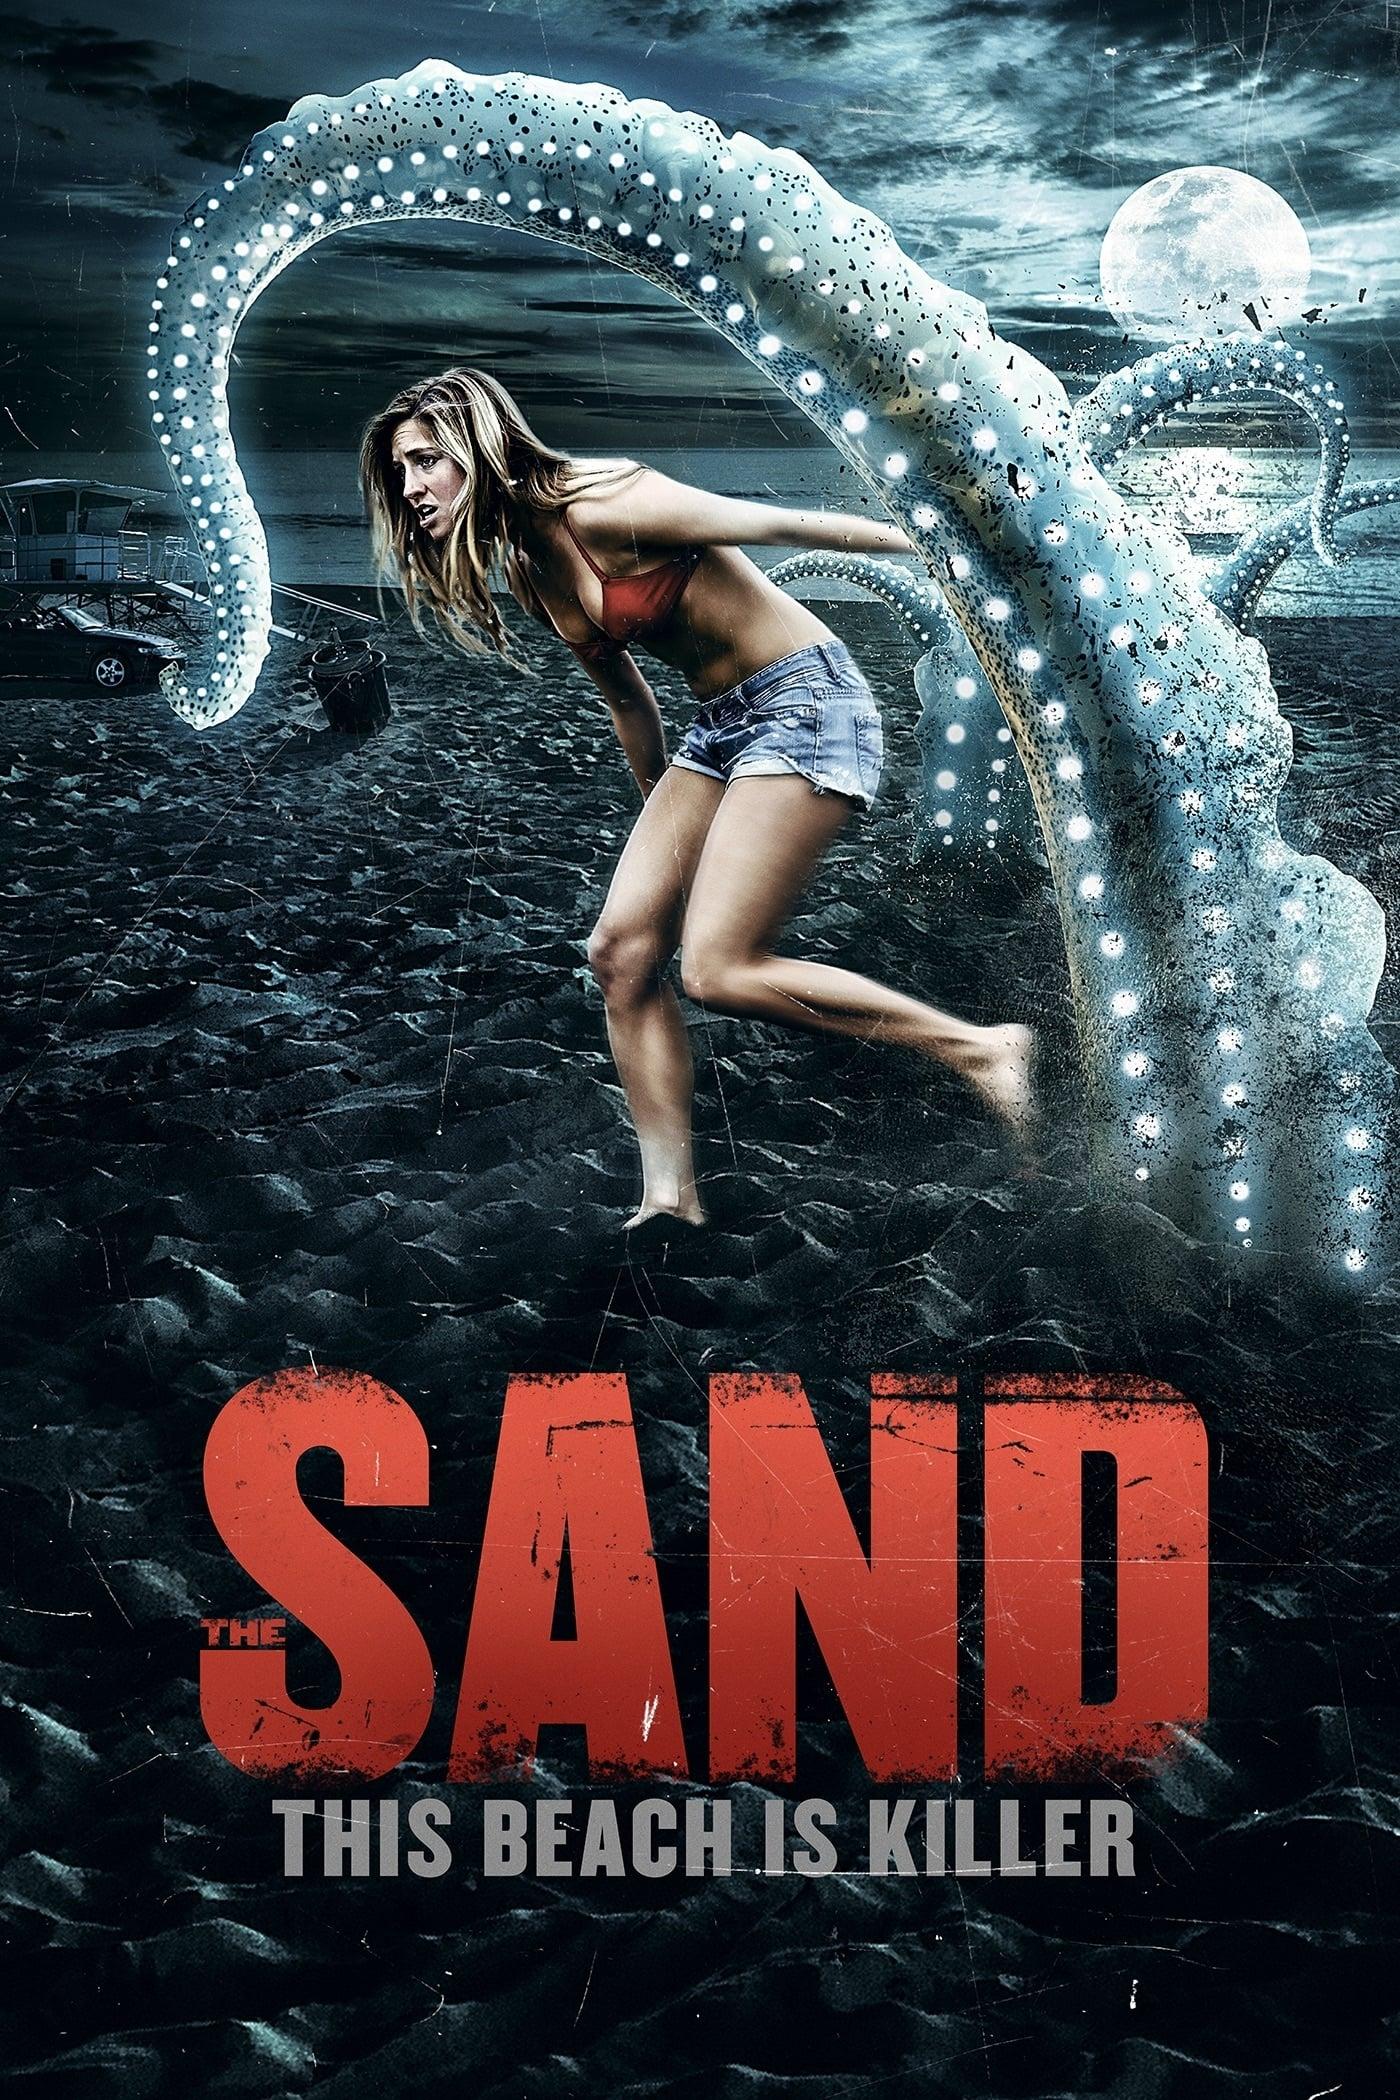 The Sand poster